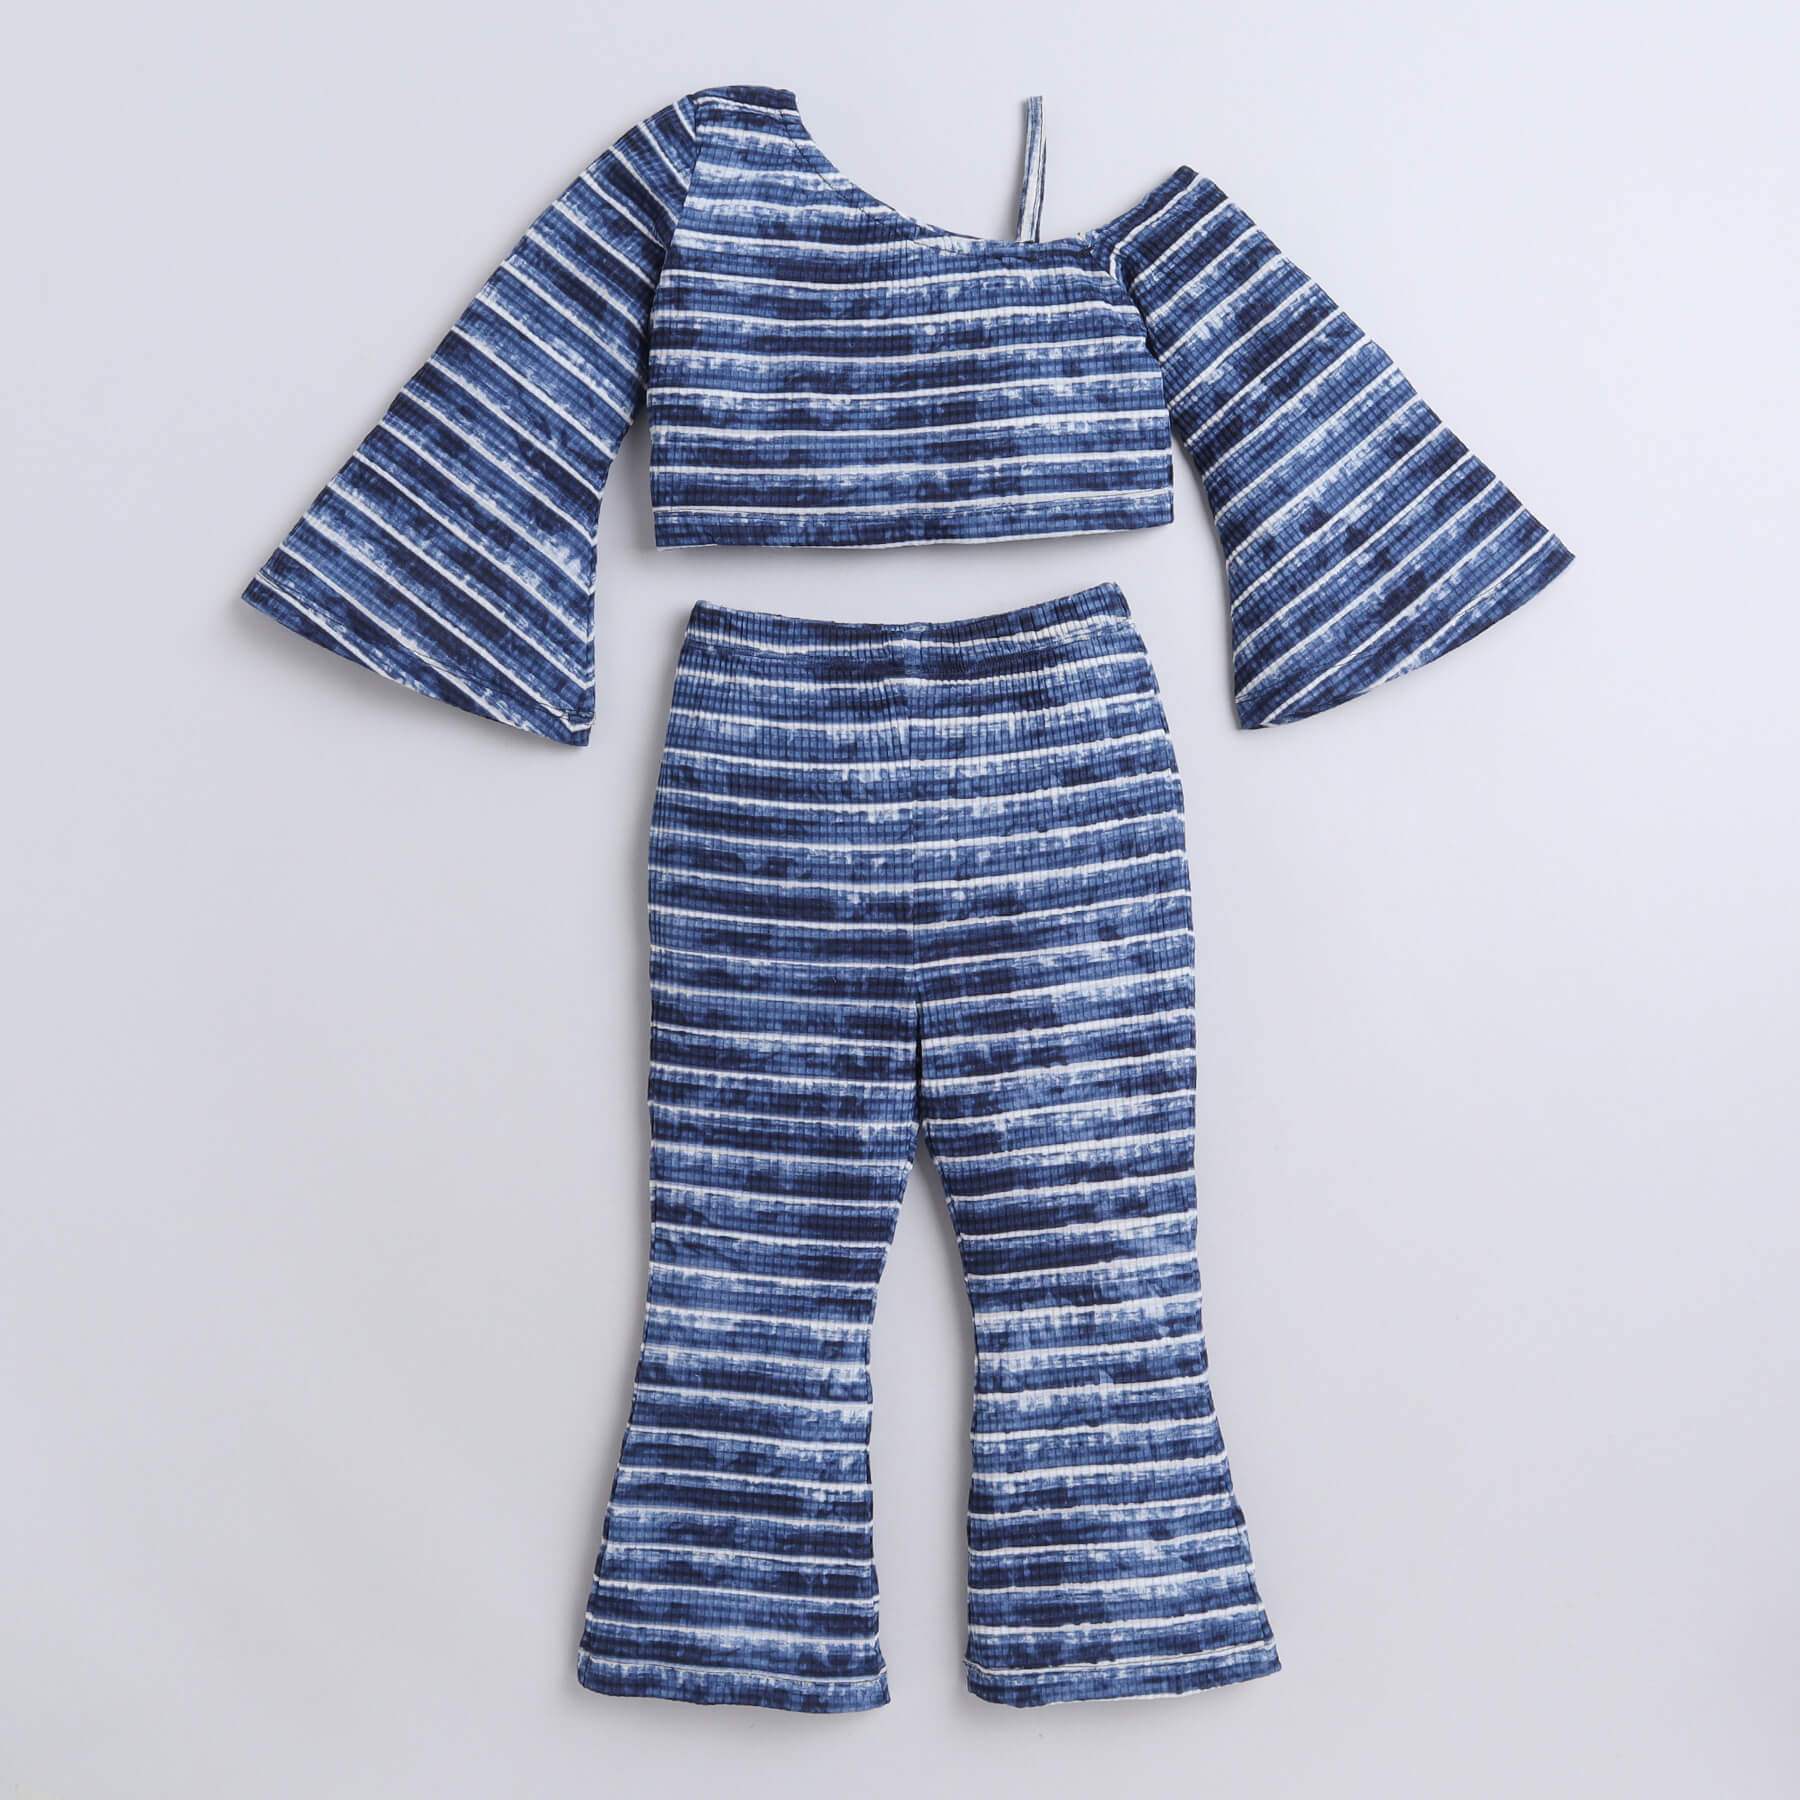 Taffykids Stripes and tie-dye printed cold shoulder top and bell bottom pant set-Blue